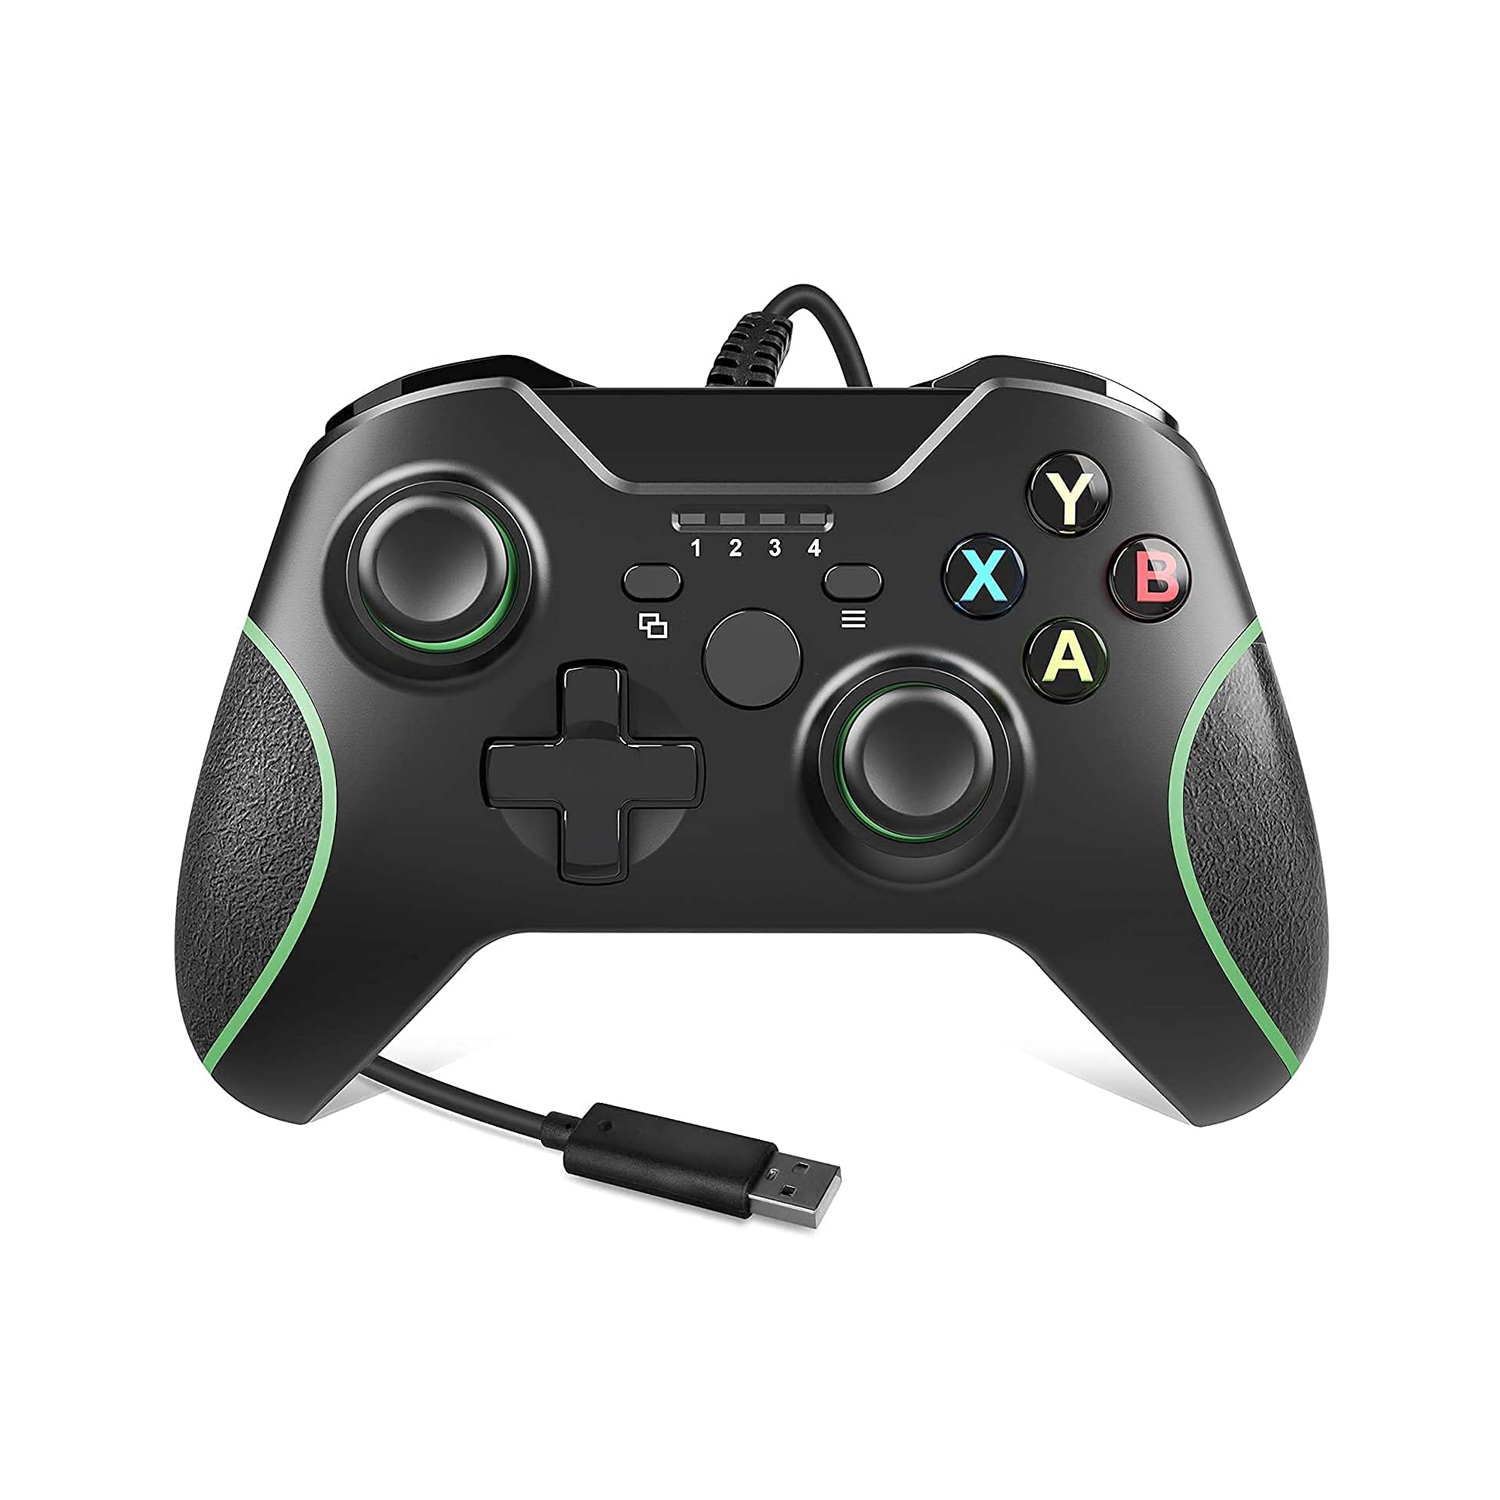 Wired Controller PC Console Game Controller Gamepad For Xbox One/One S/One X And PC - Black